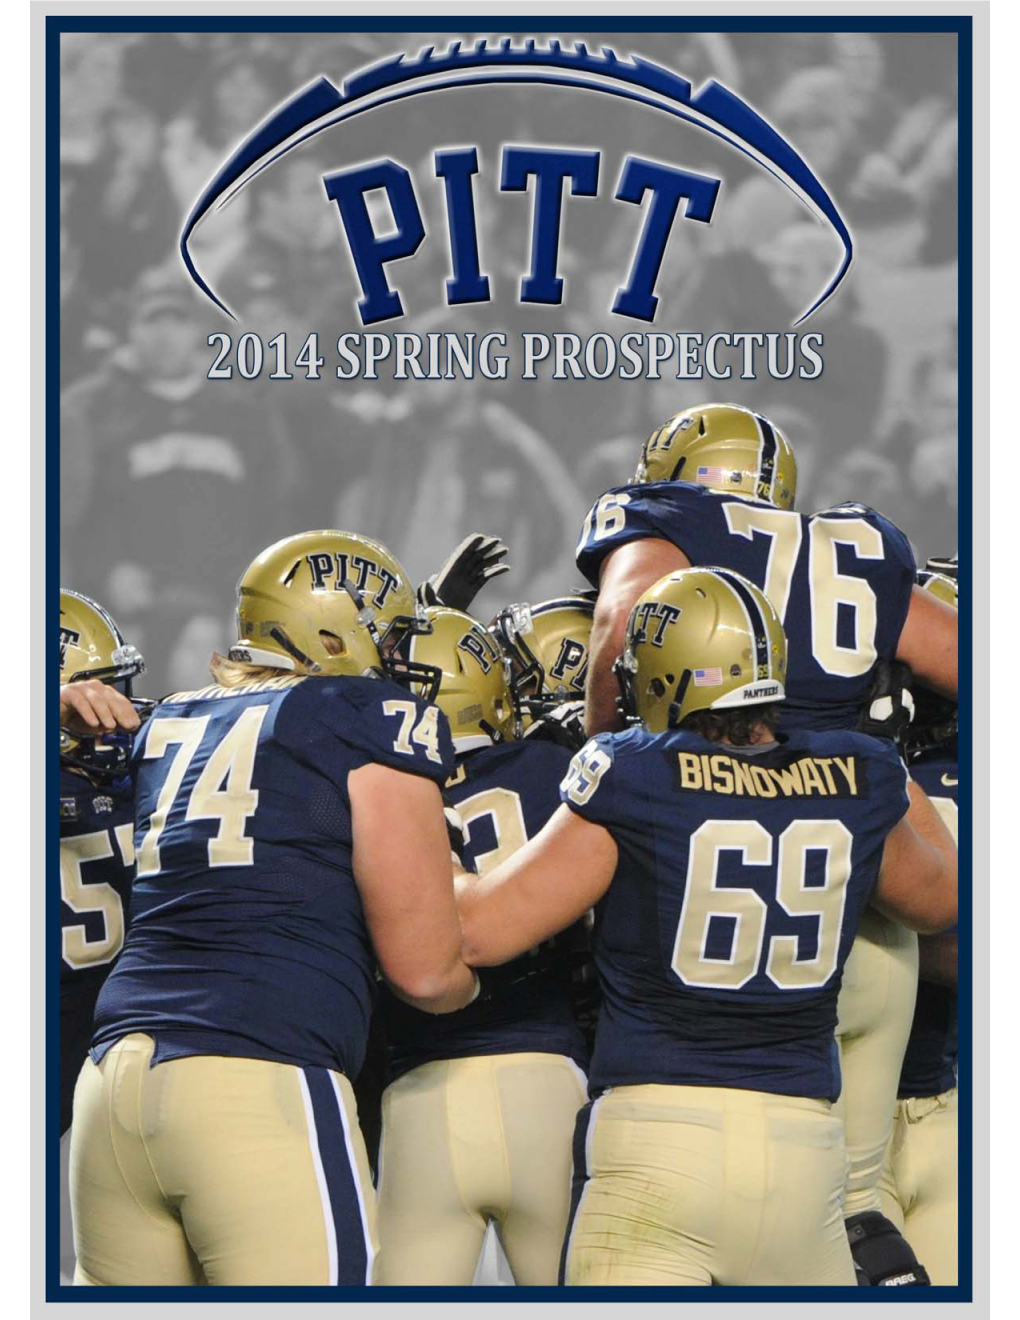 Lafayette Pitts (23.1 Avg.) and Tyler Boyd (22.4 Avg.) Pitt Shared Returns the Experience Kickoff Return and Production Duties in In2013